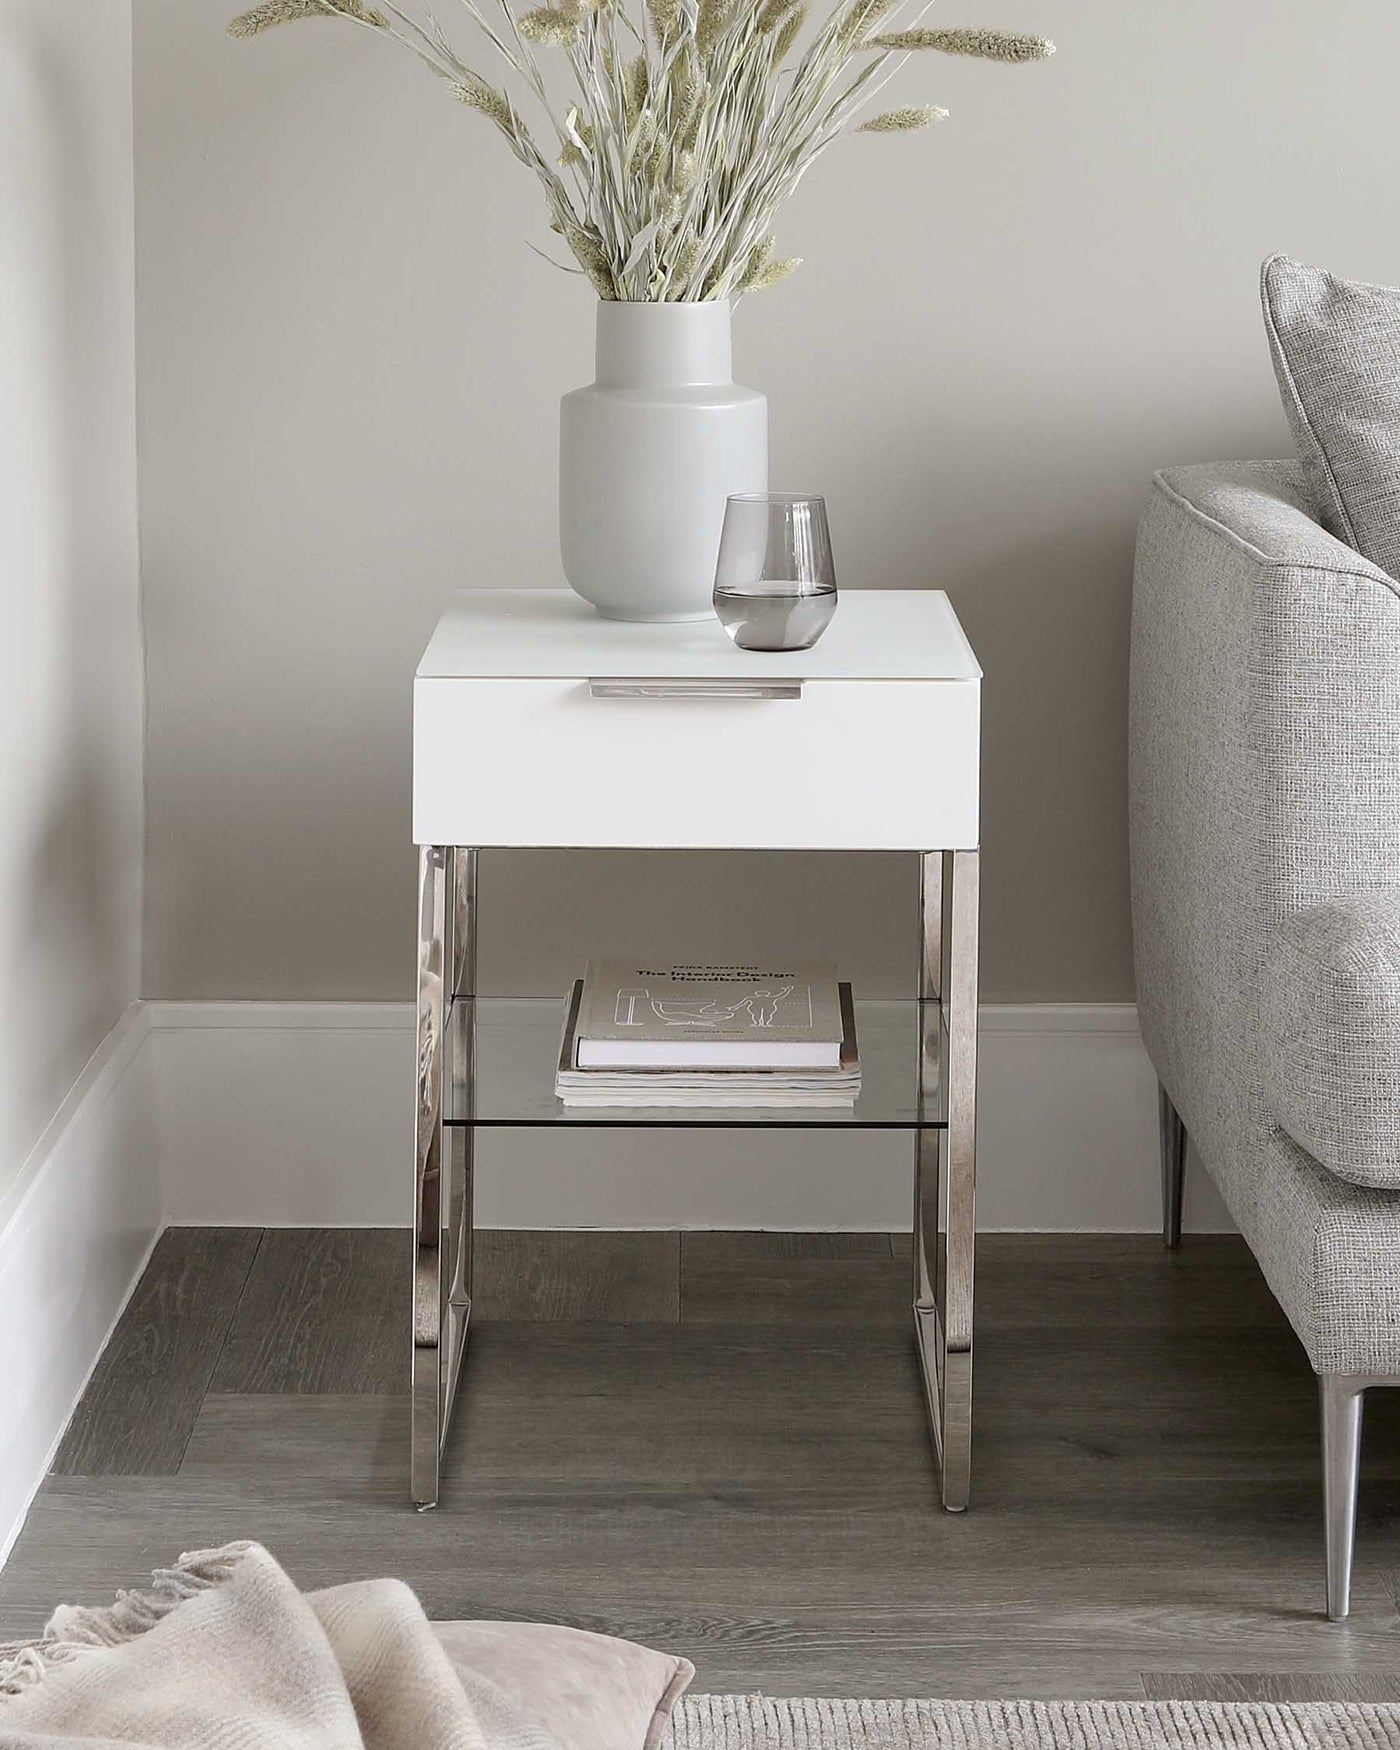 Modern white lacquered side table with chrome legs and an open lower shelf, displayed alongside a grey fabric upholstered armchair. The table is accessorized with a large matte grey vase holding dried foliage and a simple clear glass.